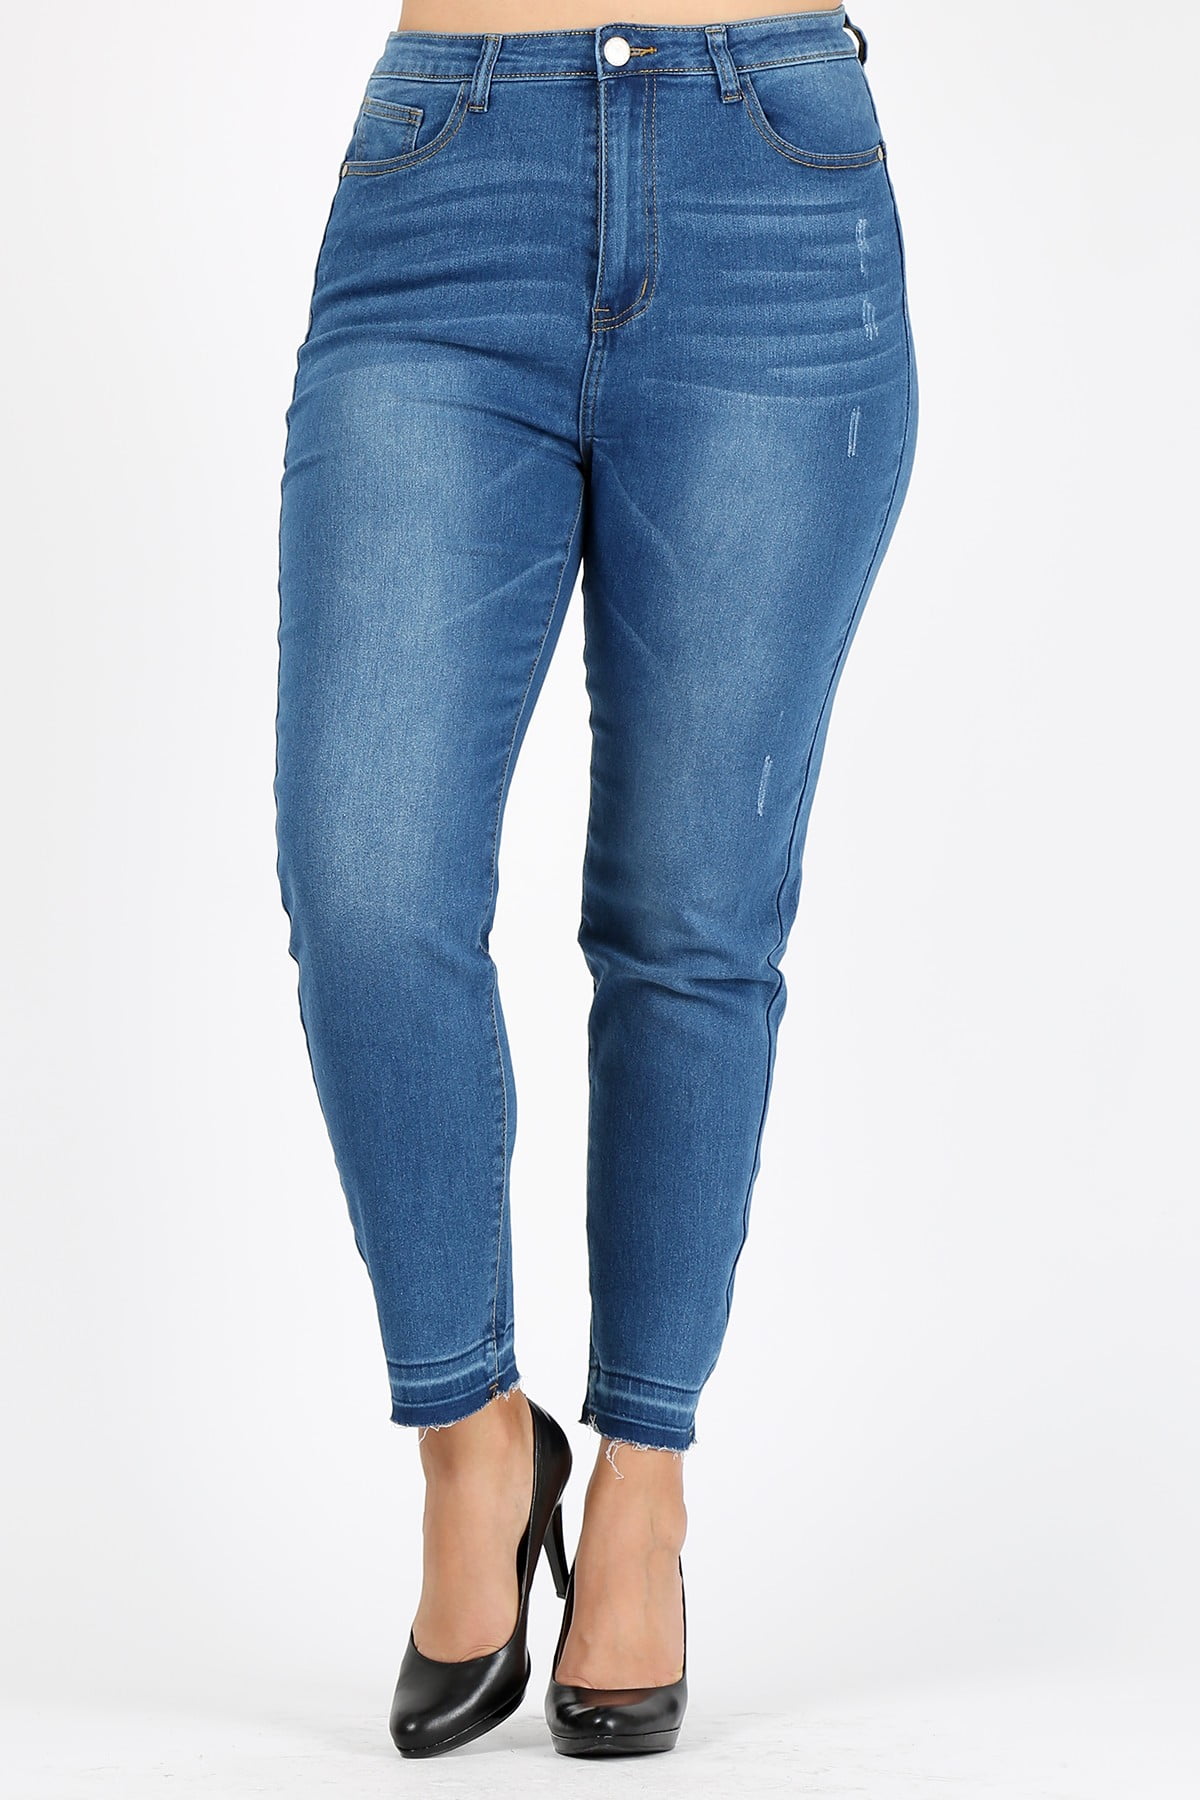 Plus size denim jeans with whiskered wash distressed raw-hem and high ...